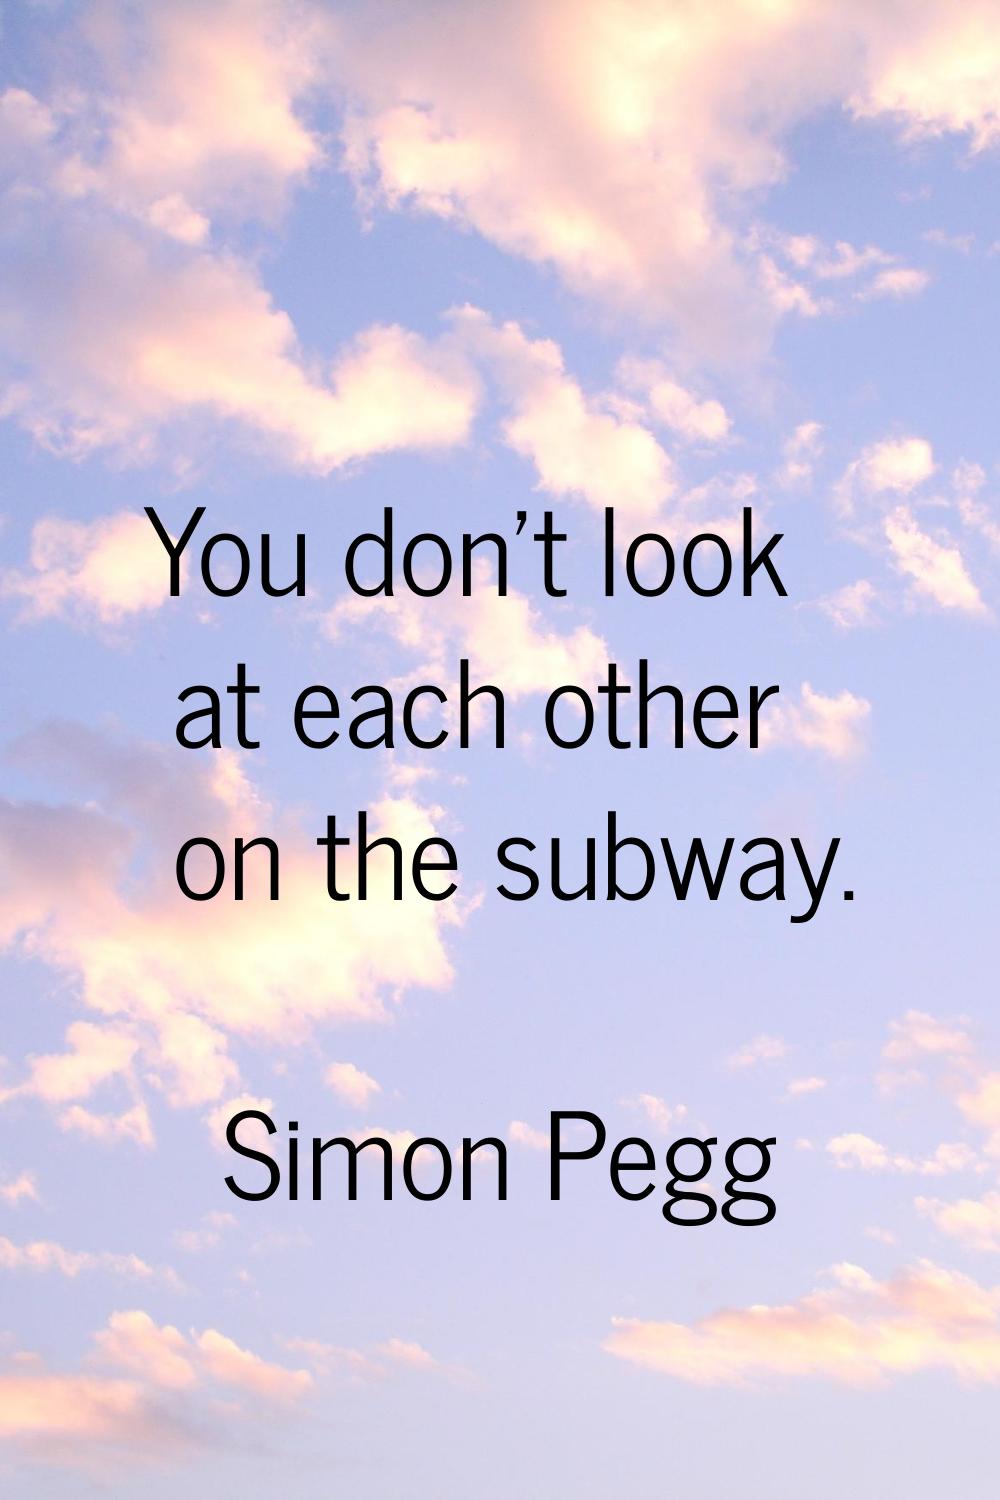 You don't look at each other on the subway.